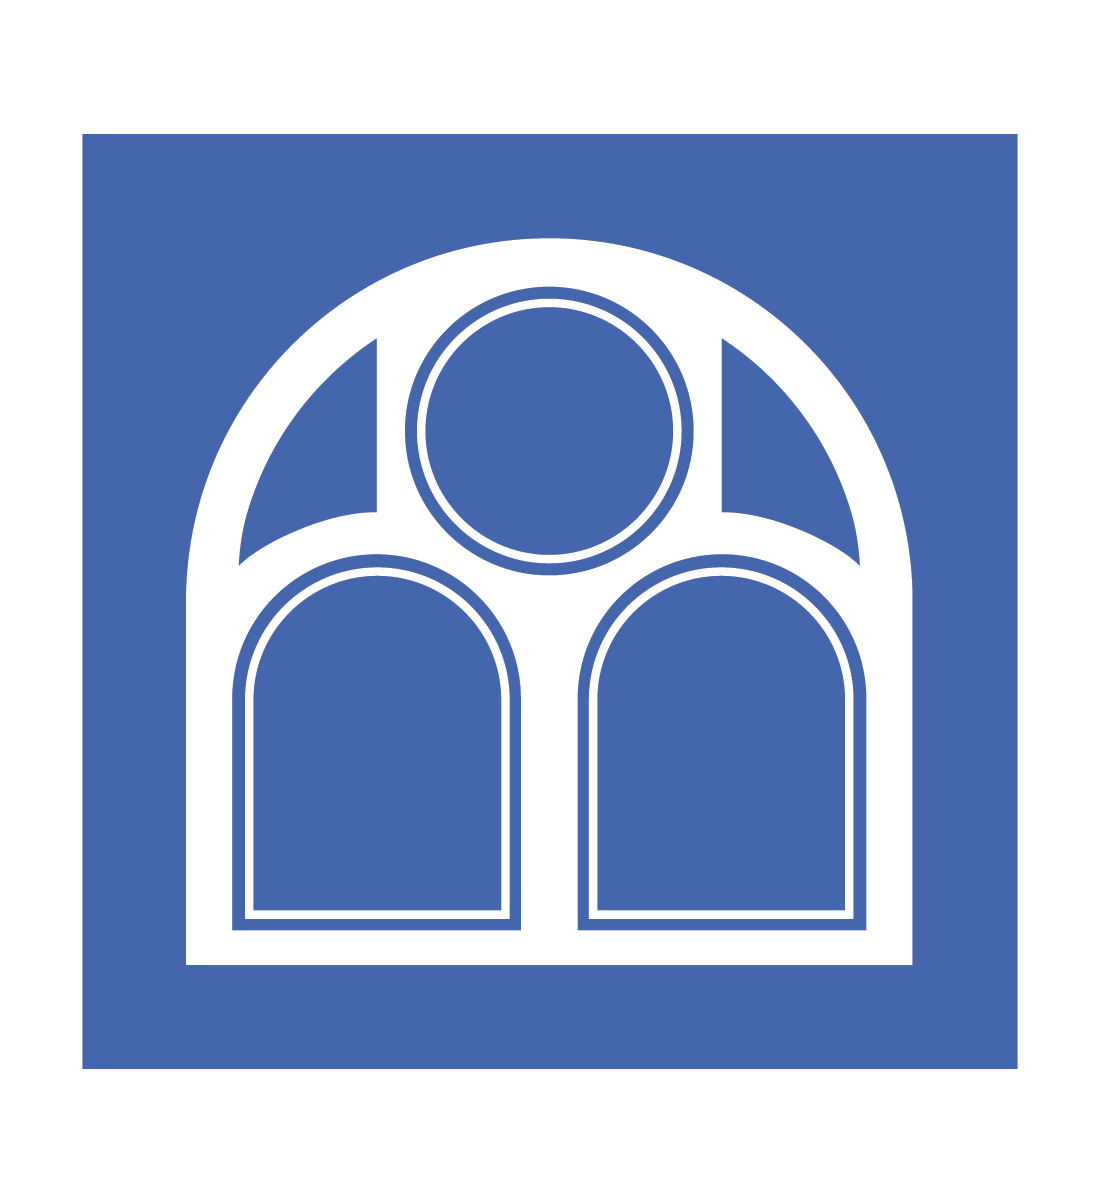 Potomac Ventures Logo, arched window icon on blue background